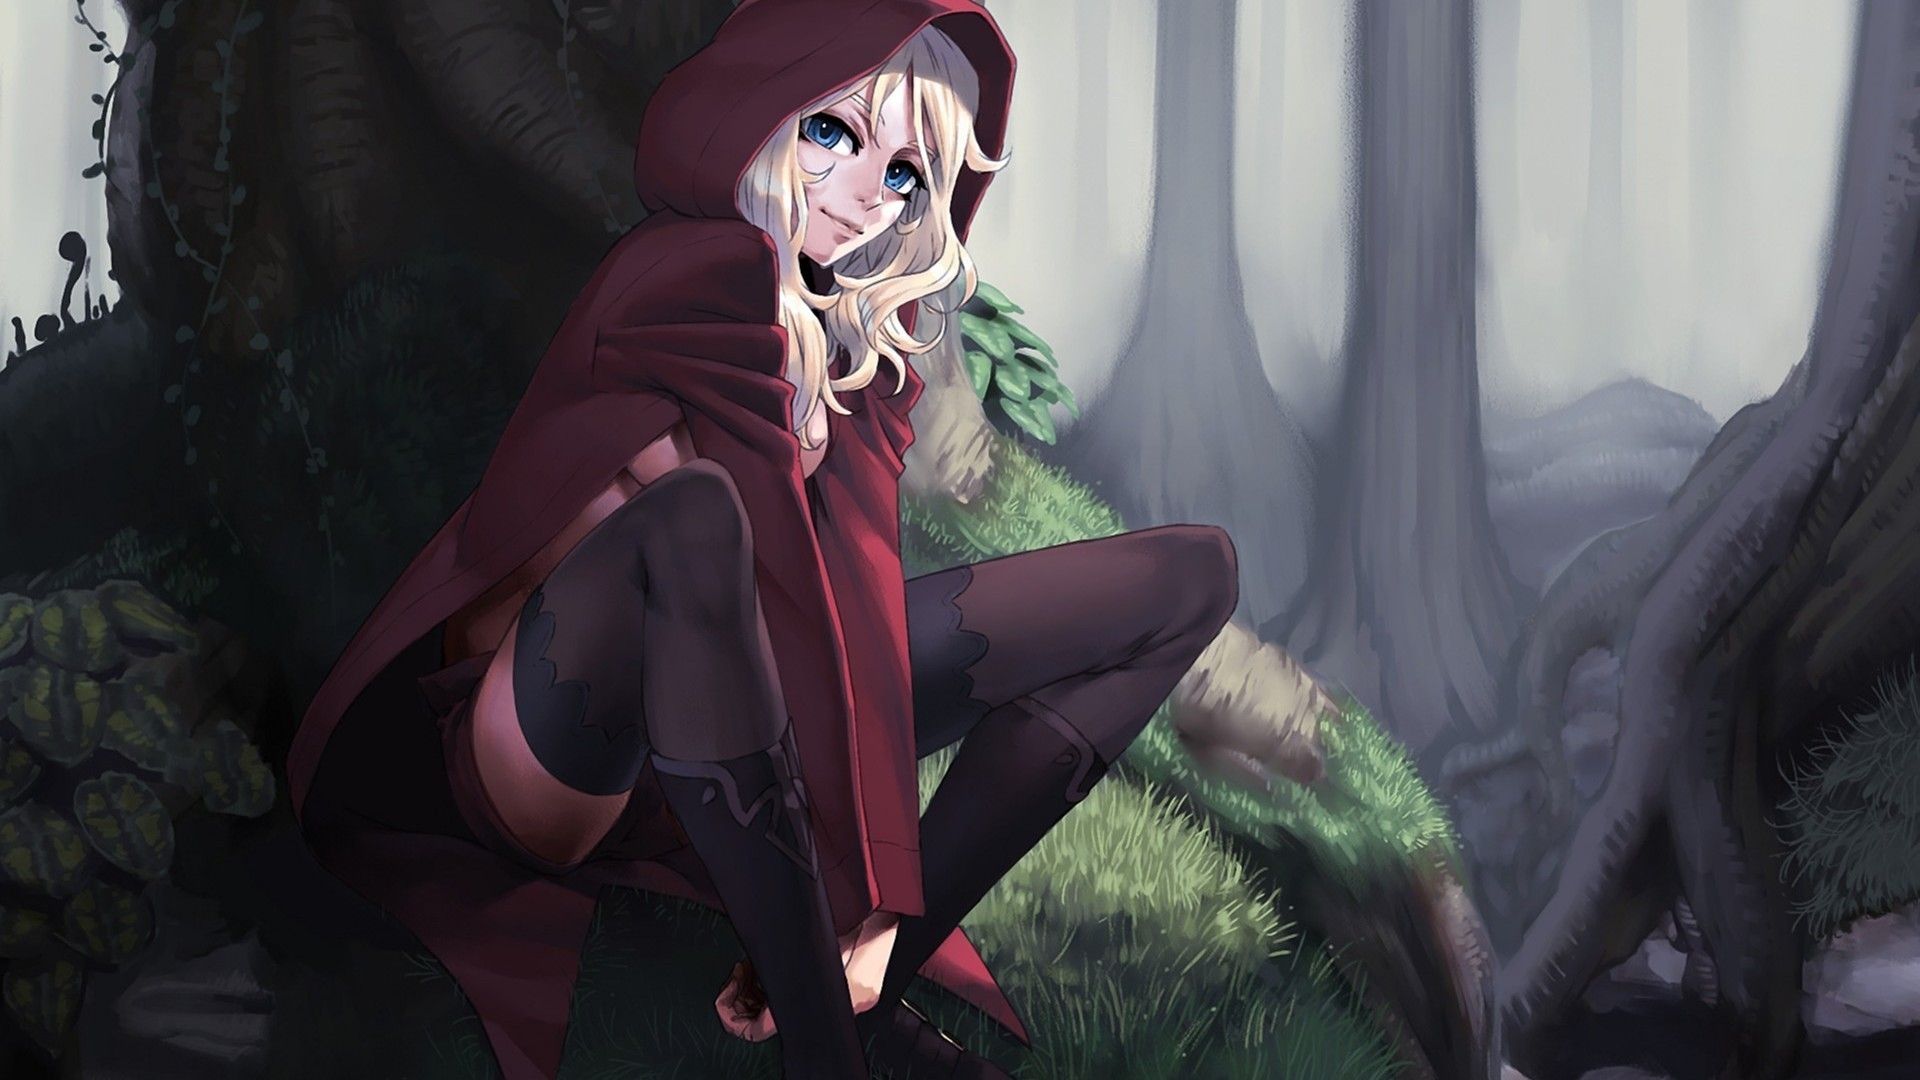 blondes, trees, stockings, anime, Red Hood wallpaper